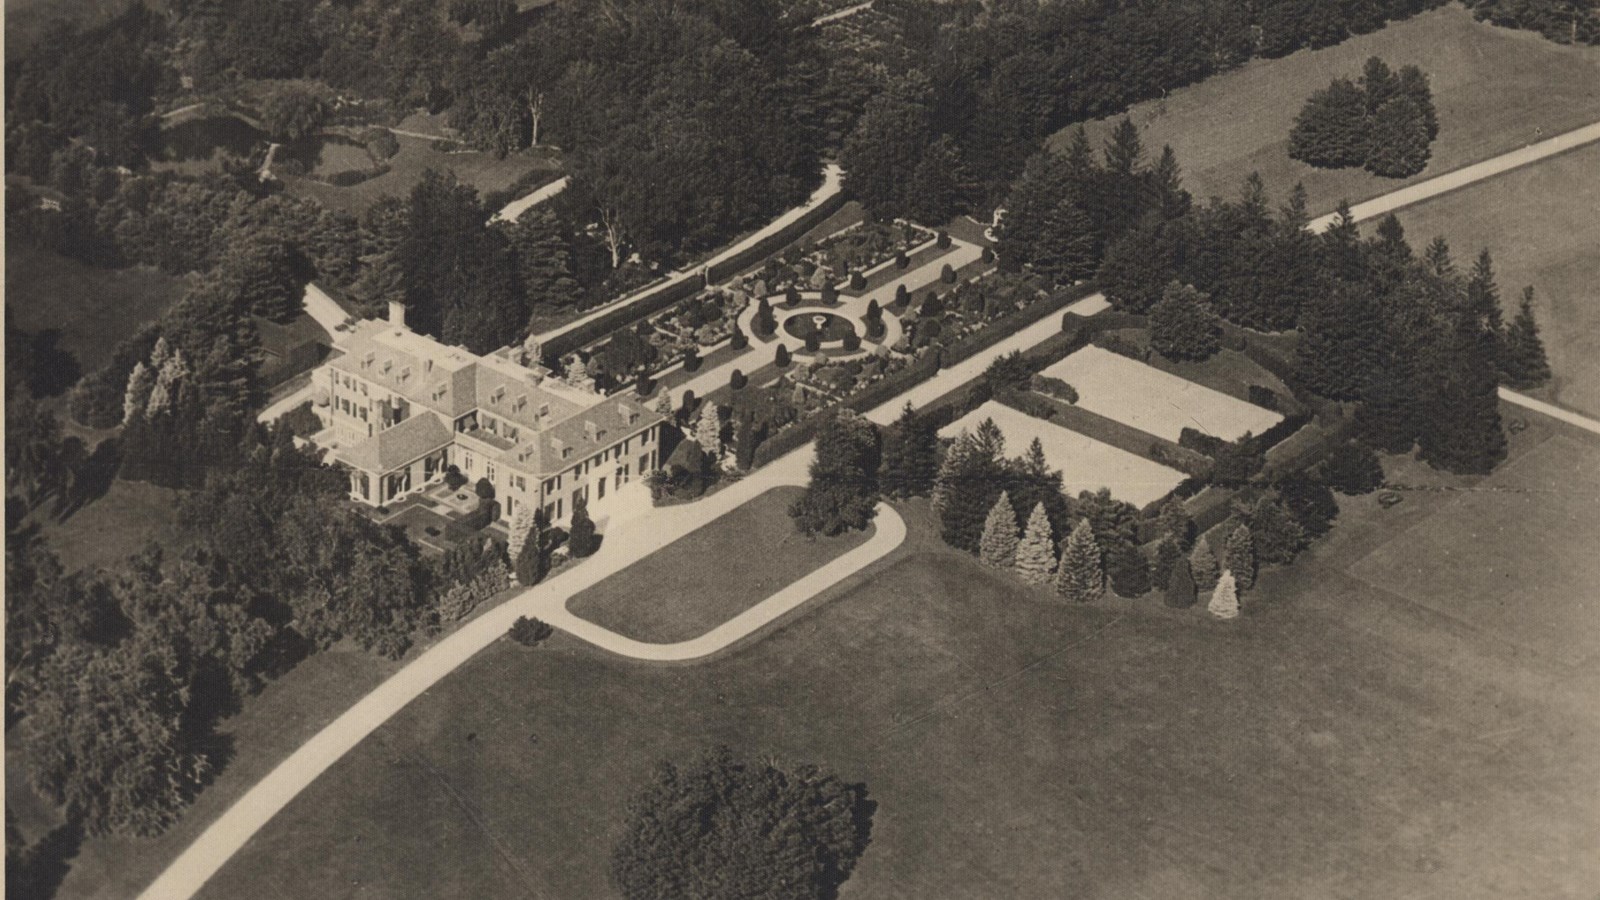 Aerial of large home with garden area and many trees around